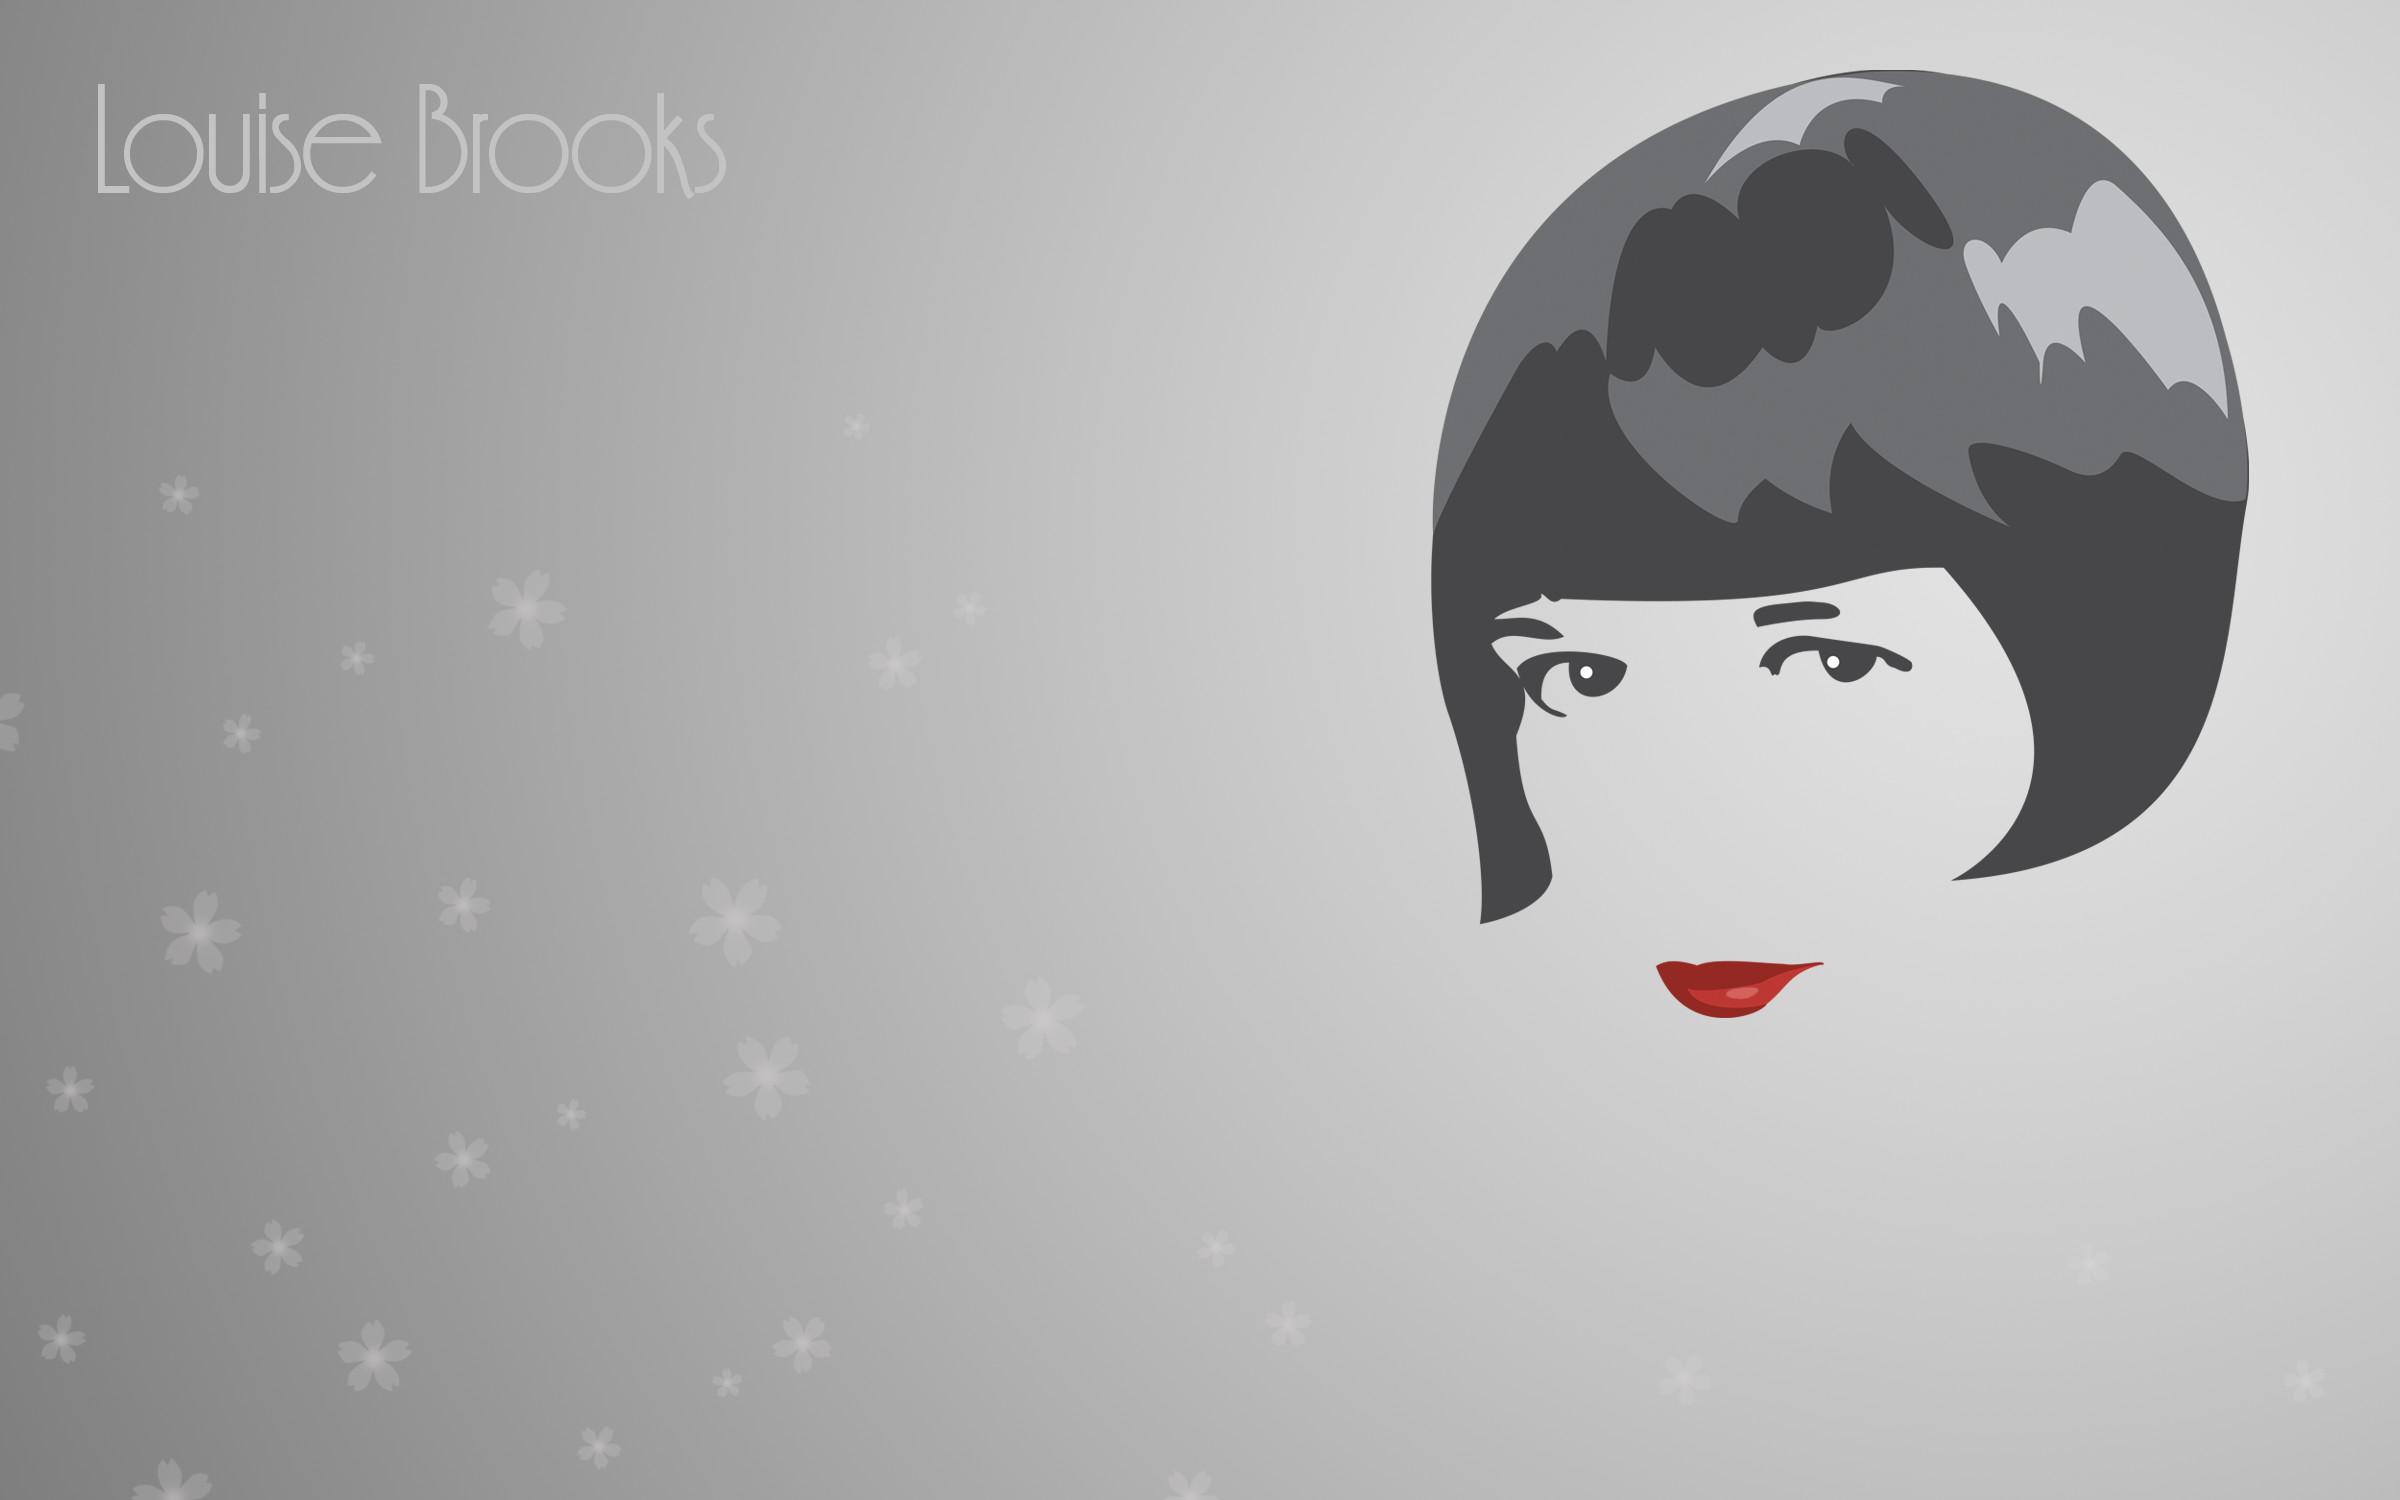 2400x1500 Louise Brooks - colored by Fritters Louise Brooks - colored by Fritters